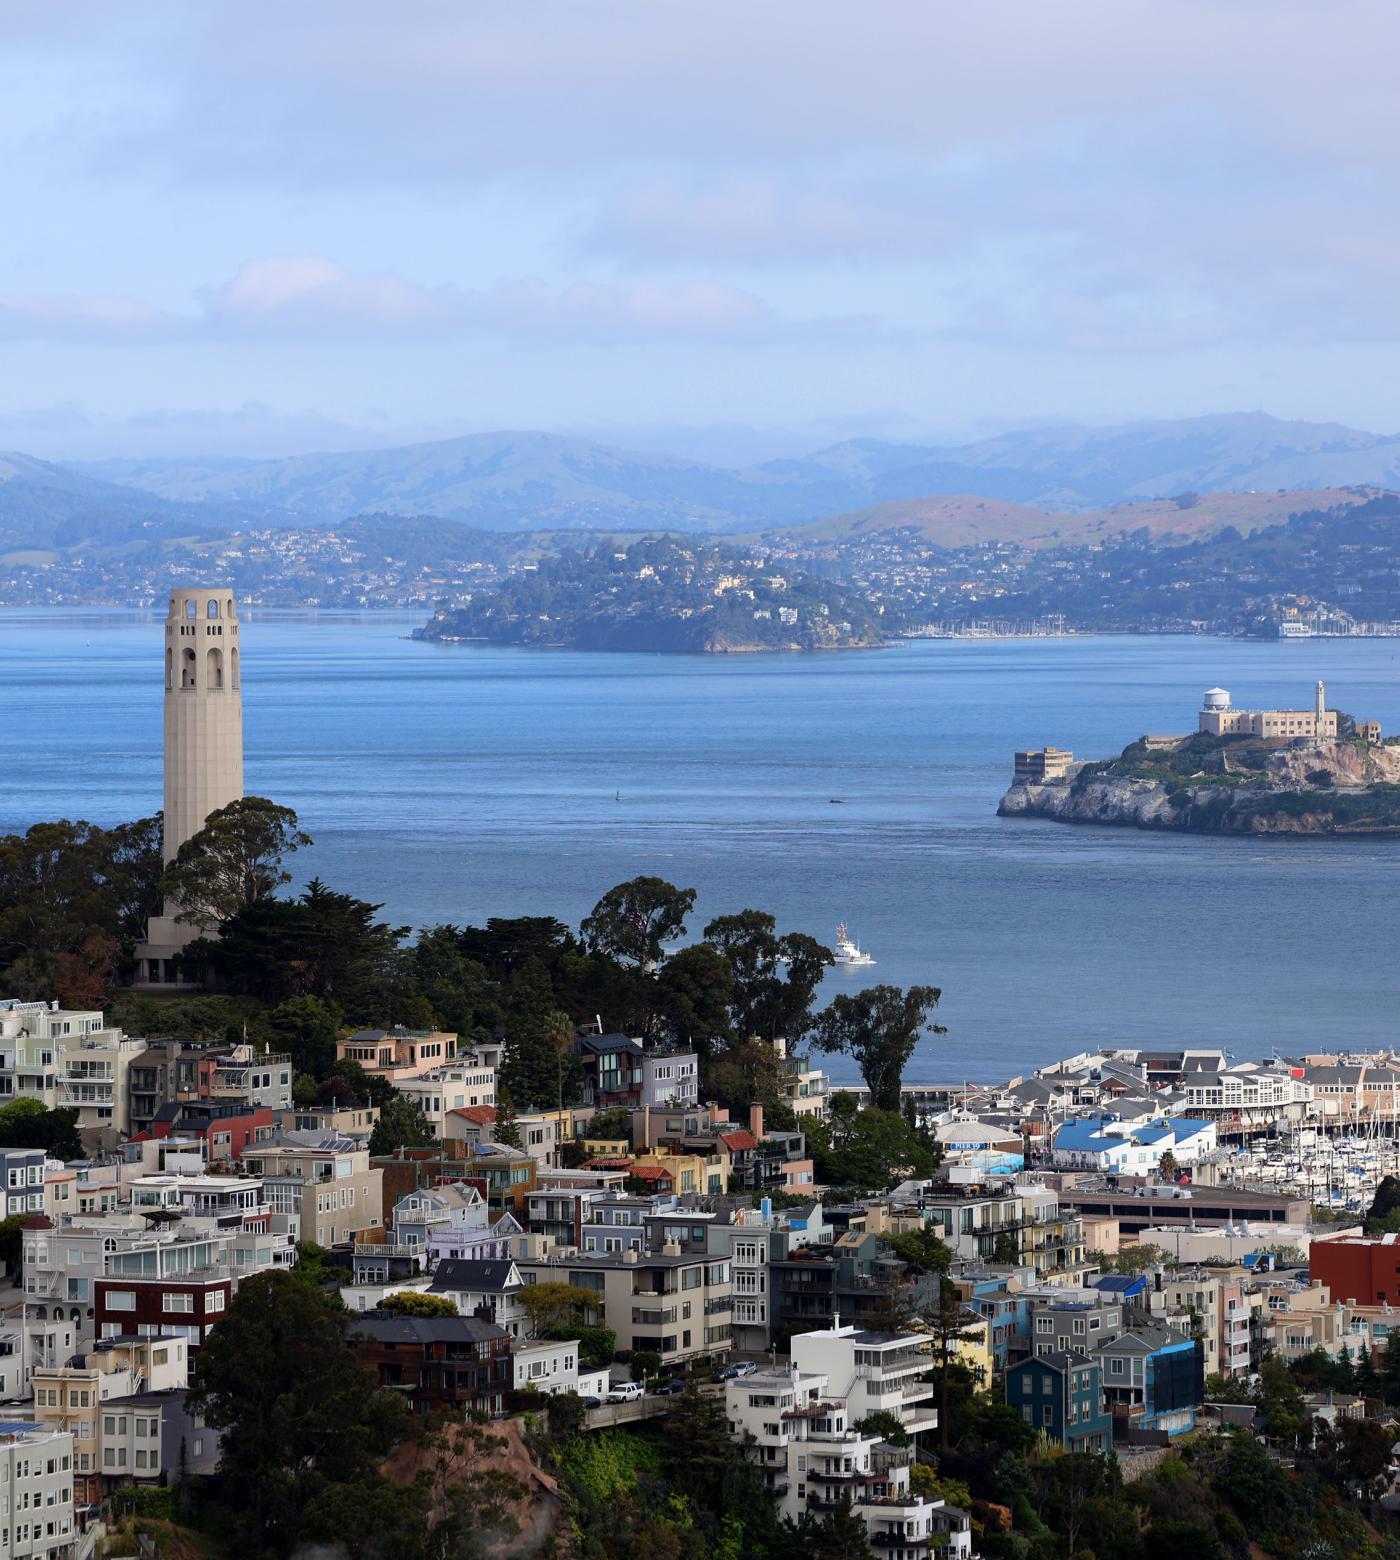 View of Coit Tower and Alcatraz from 50 California St.